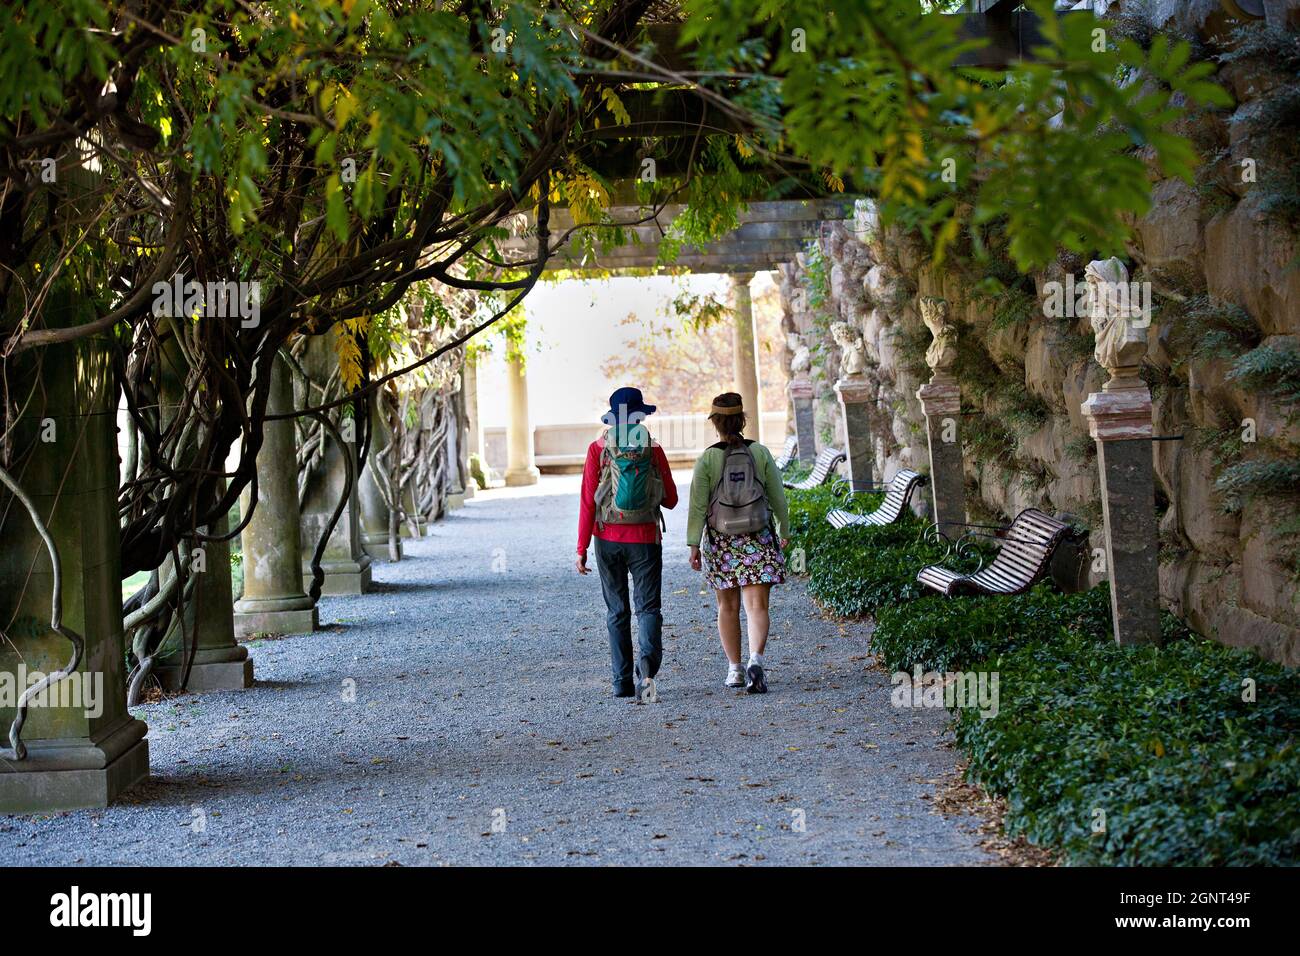 Two women walk through a vine tunnel in the walled gardens of the Biltmore Estate during autumn in Asheville, North Carolina. The house, privately owned by the Vanderbilt family, is the largest home in America with over 250 rooms. Stock Photo